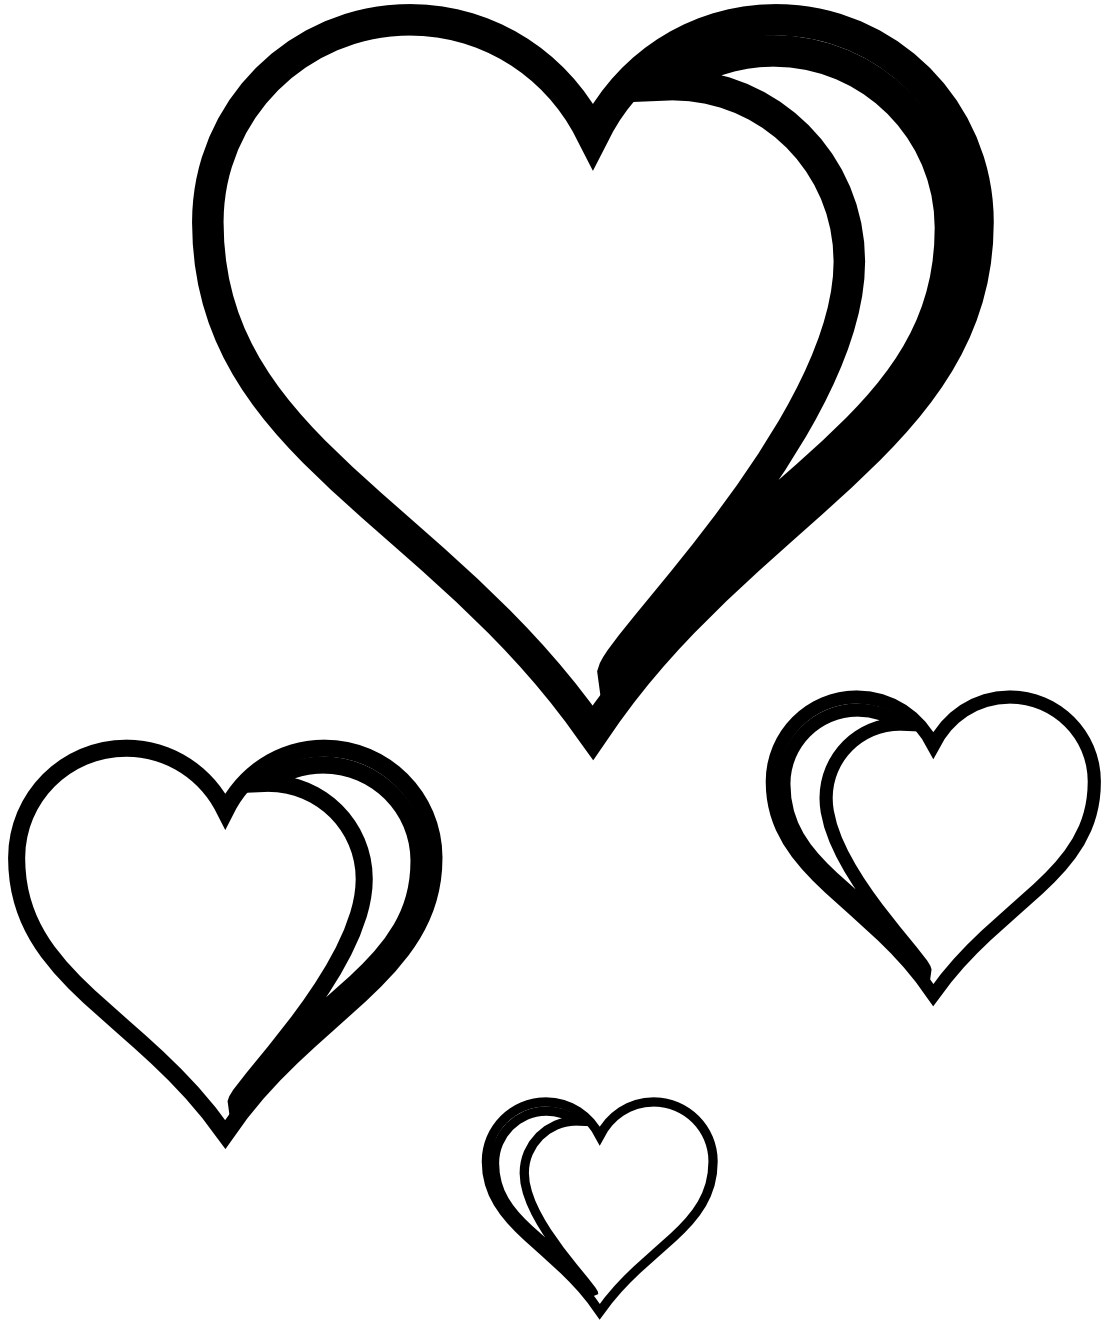 Clipart Heart Black And White - Black And White Heart Clip Art